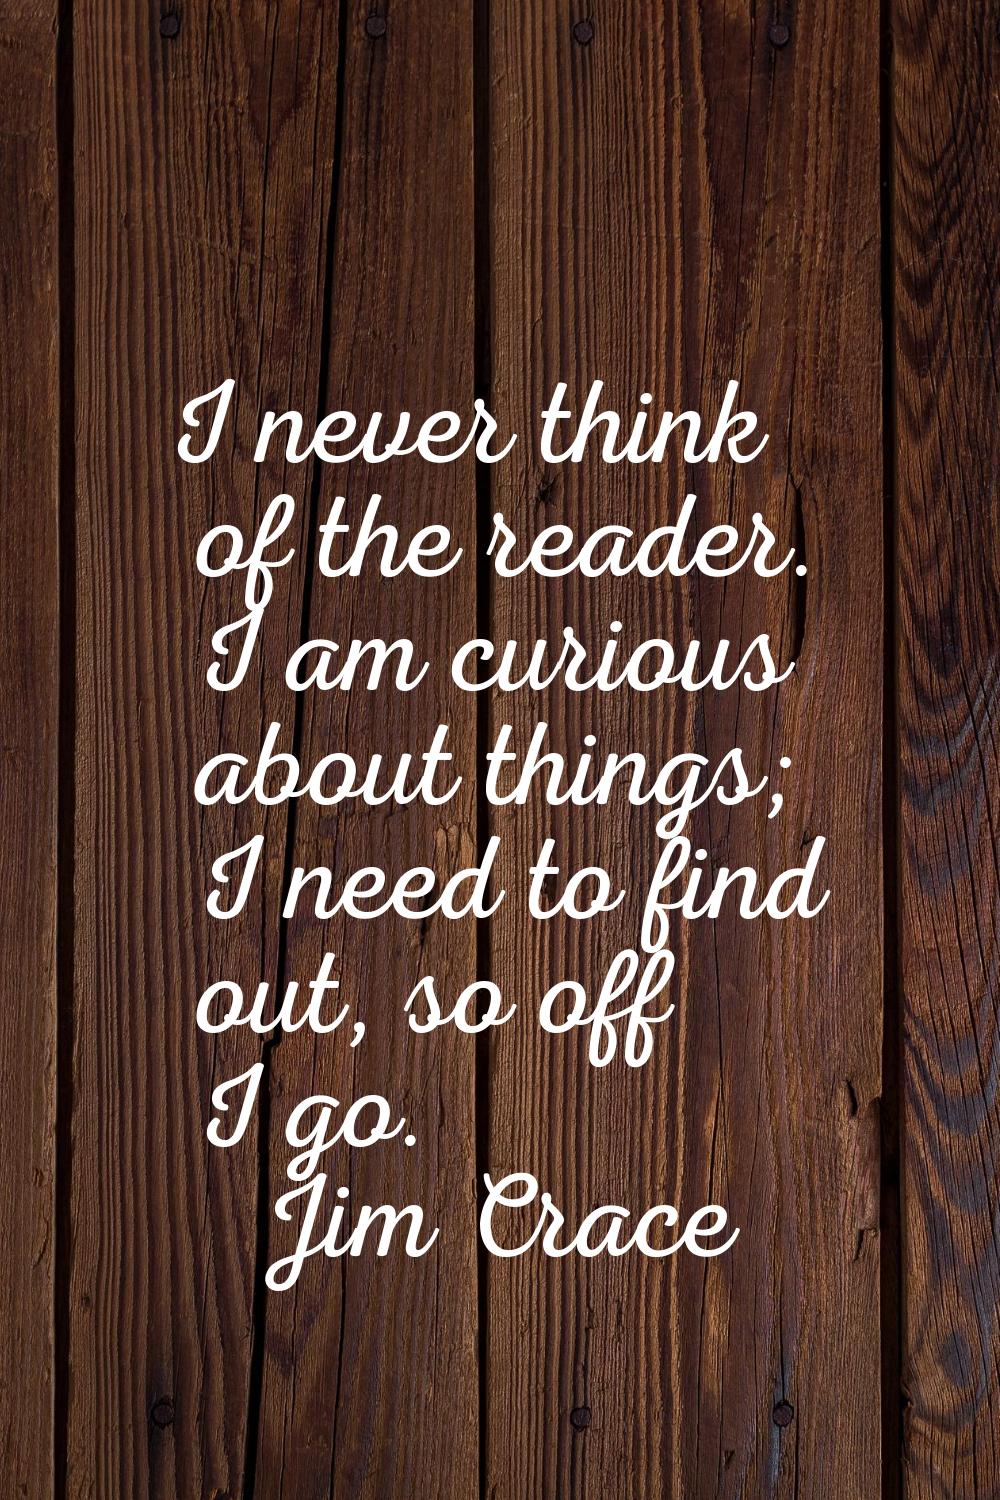 I never think of the reader. I am curious about things; I need to find out, so off I go.